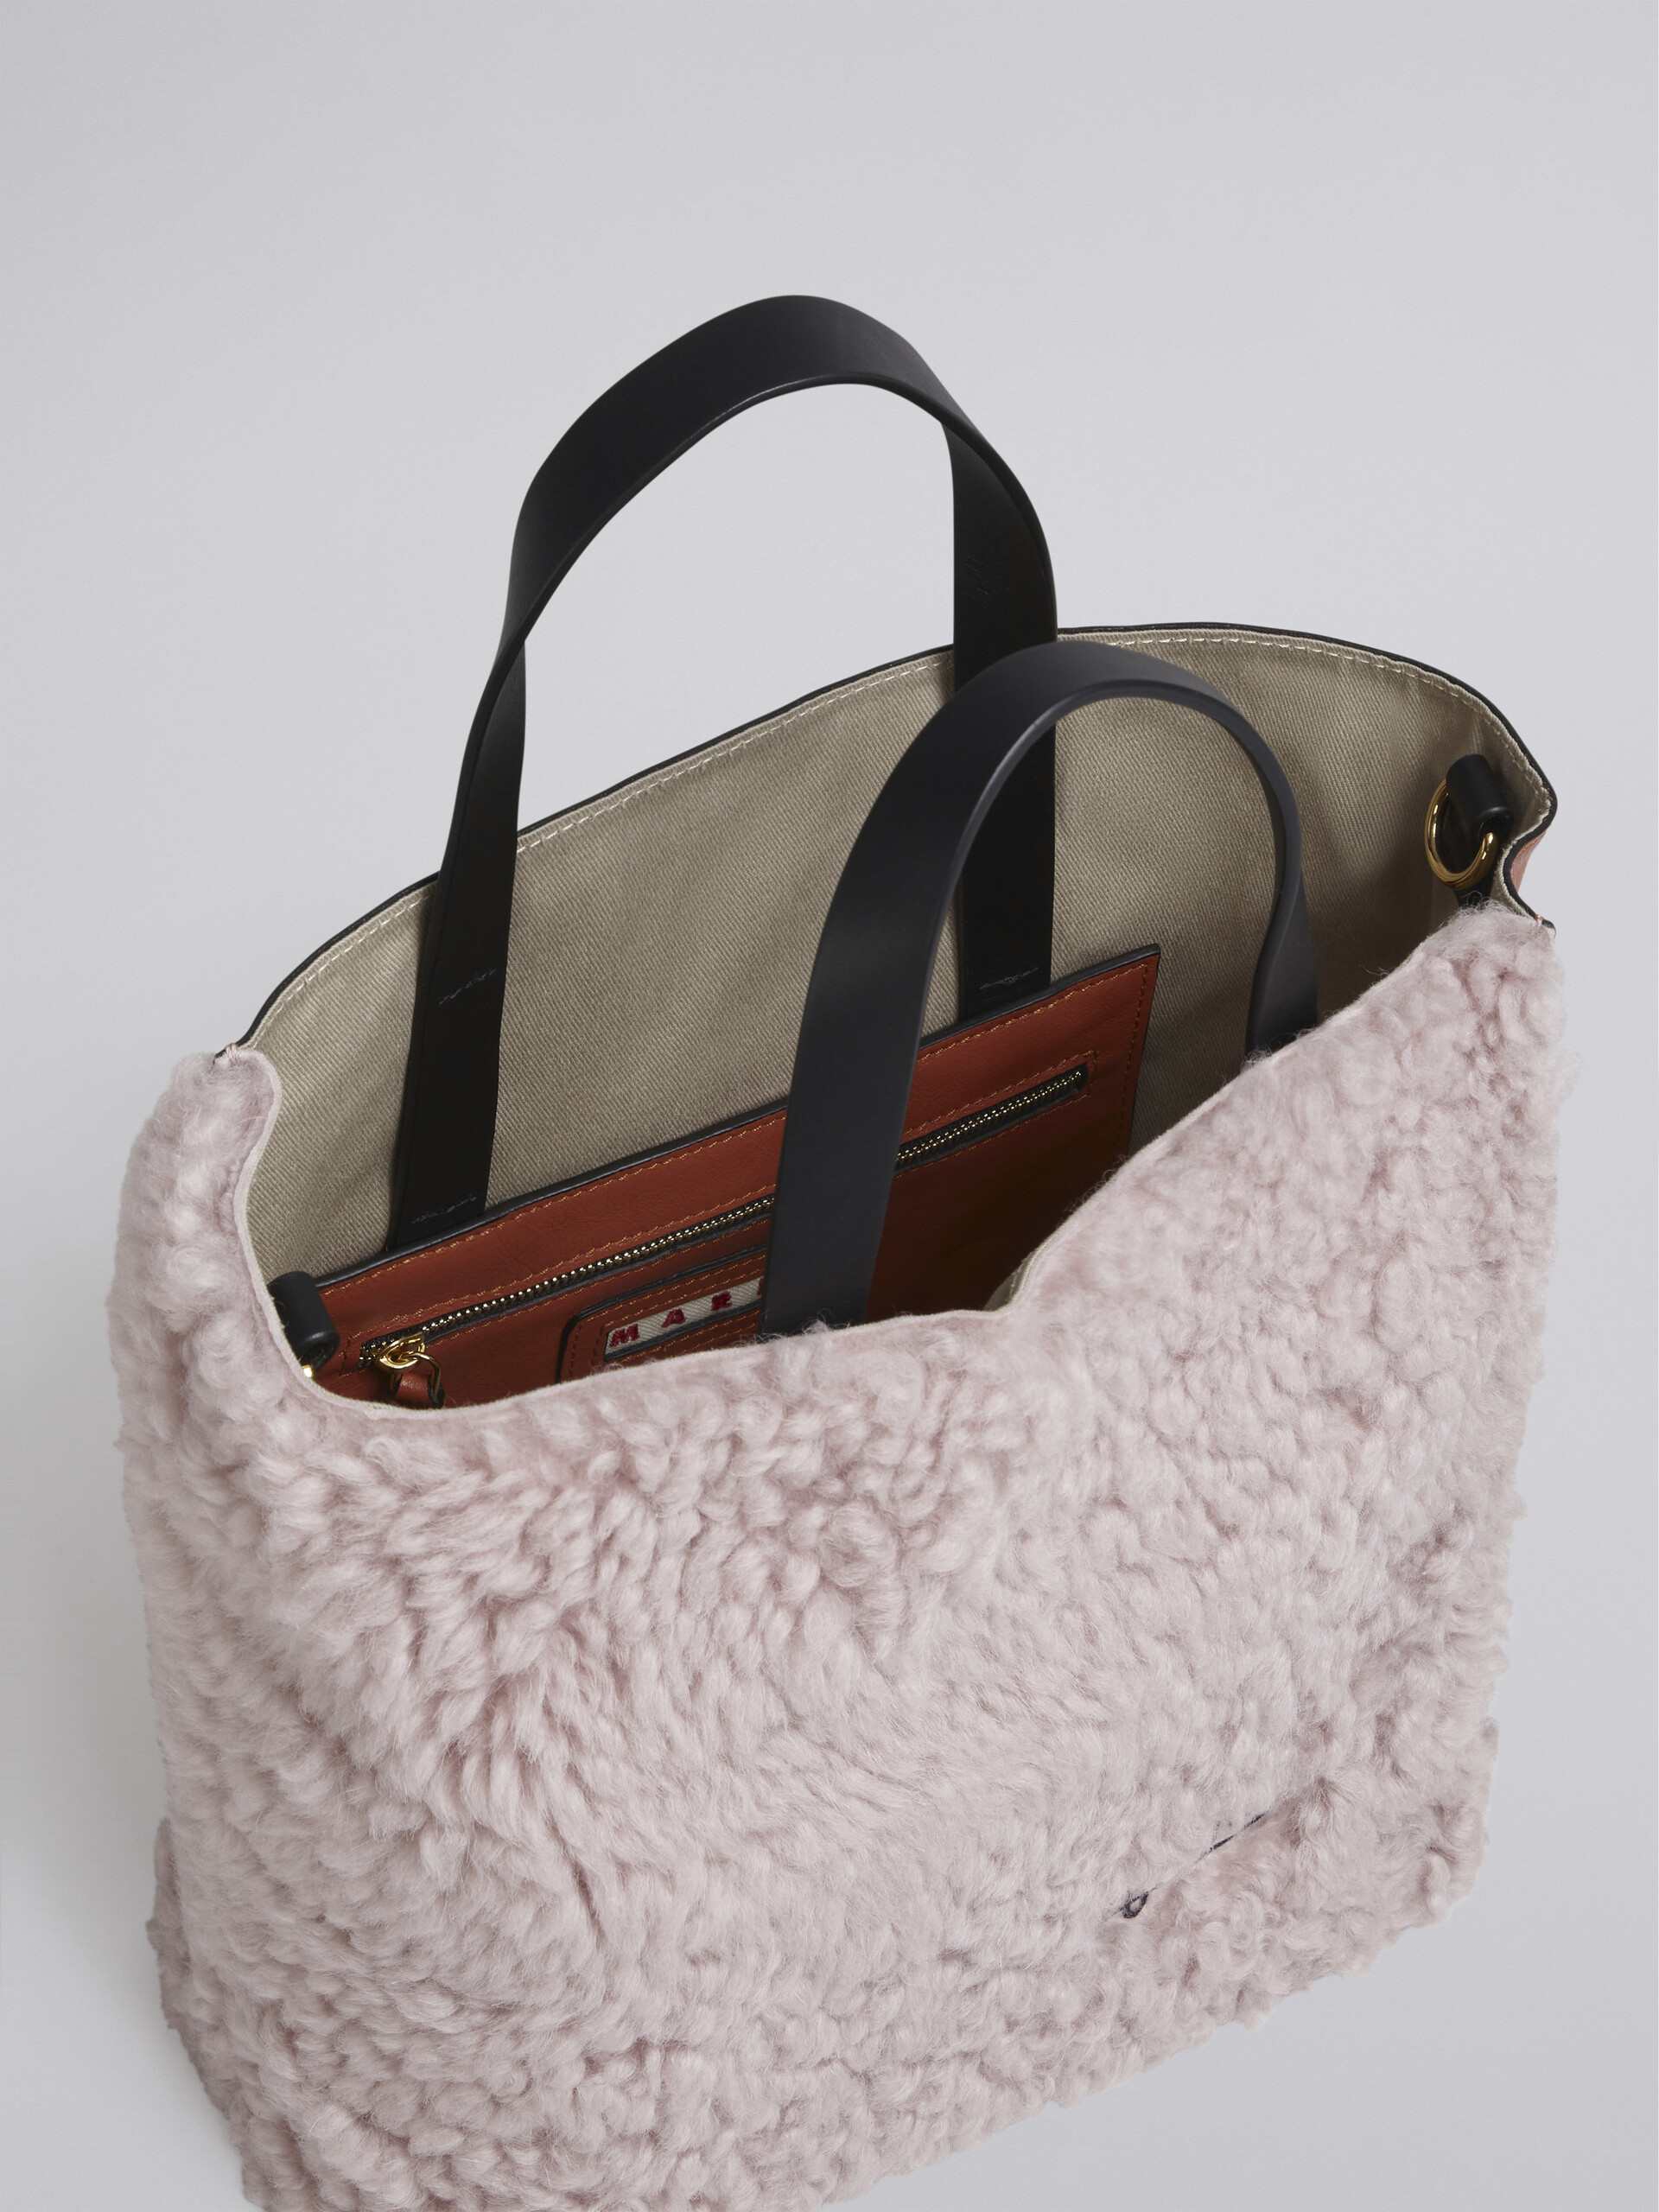 MUSEO SOFT small bag in pnk shearling - Shopping Bags - Image 3